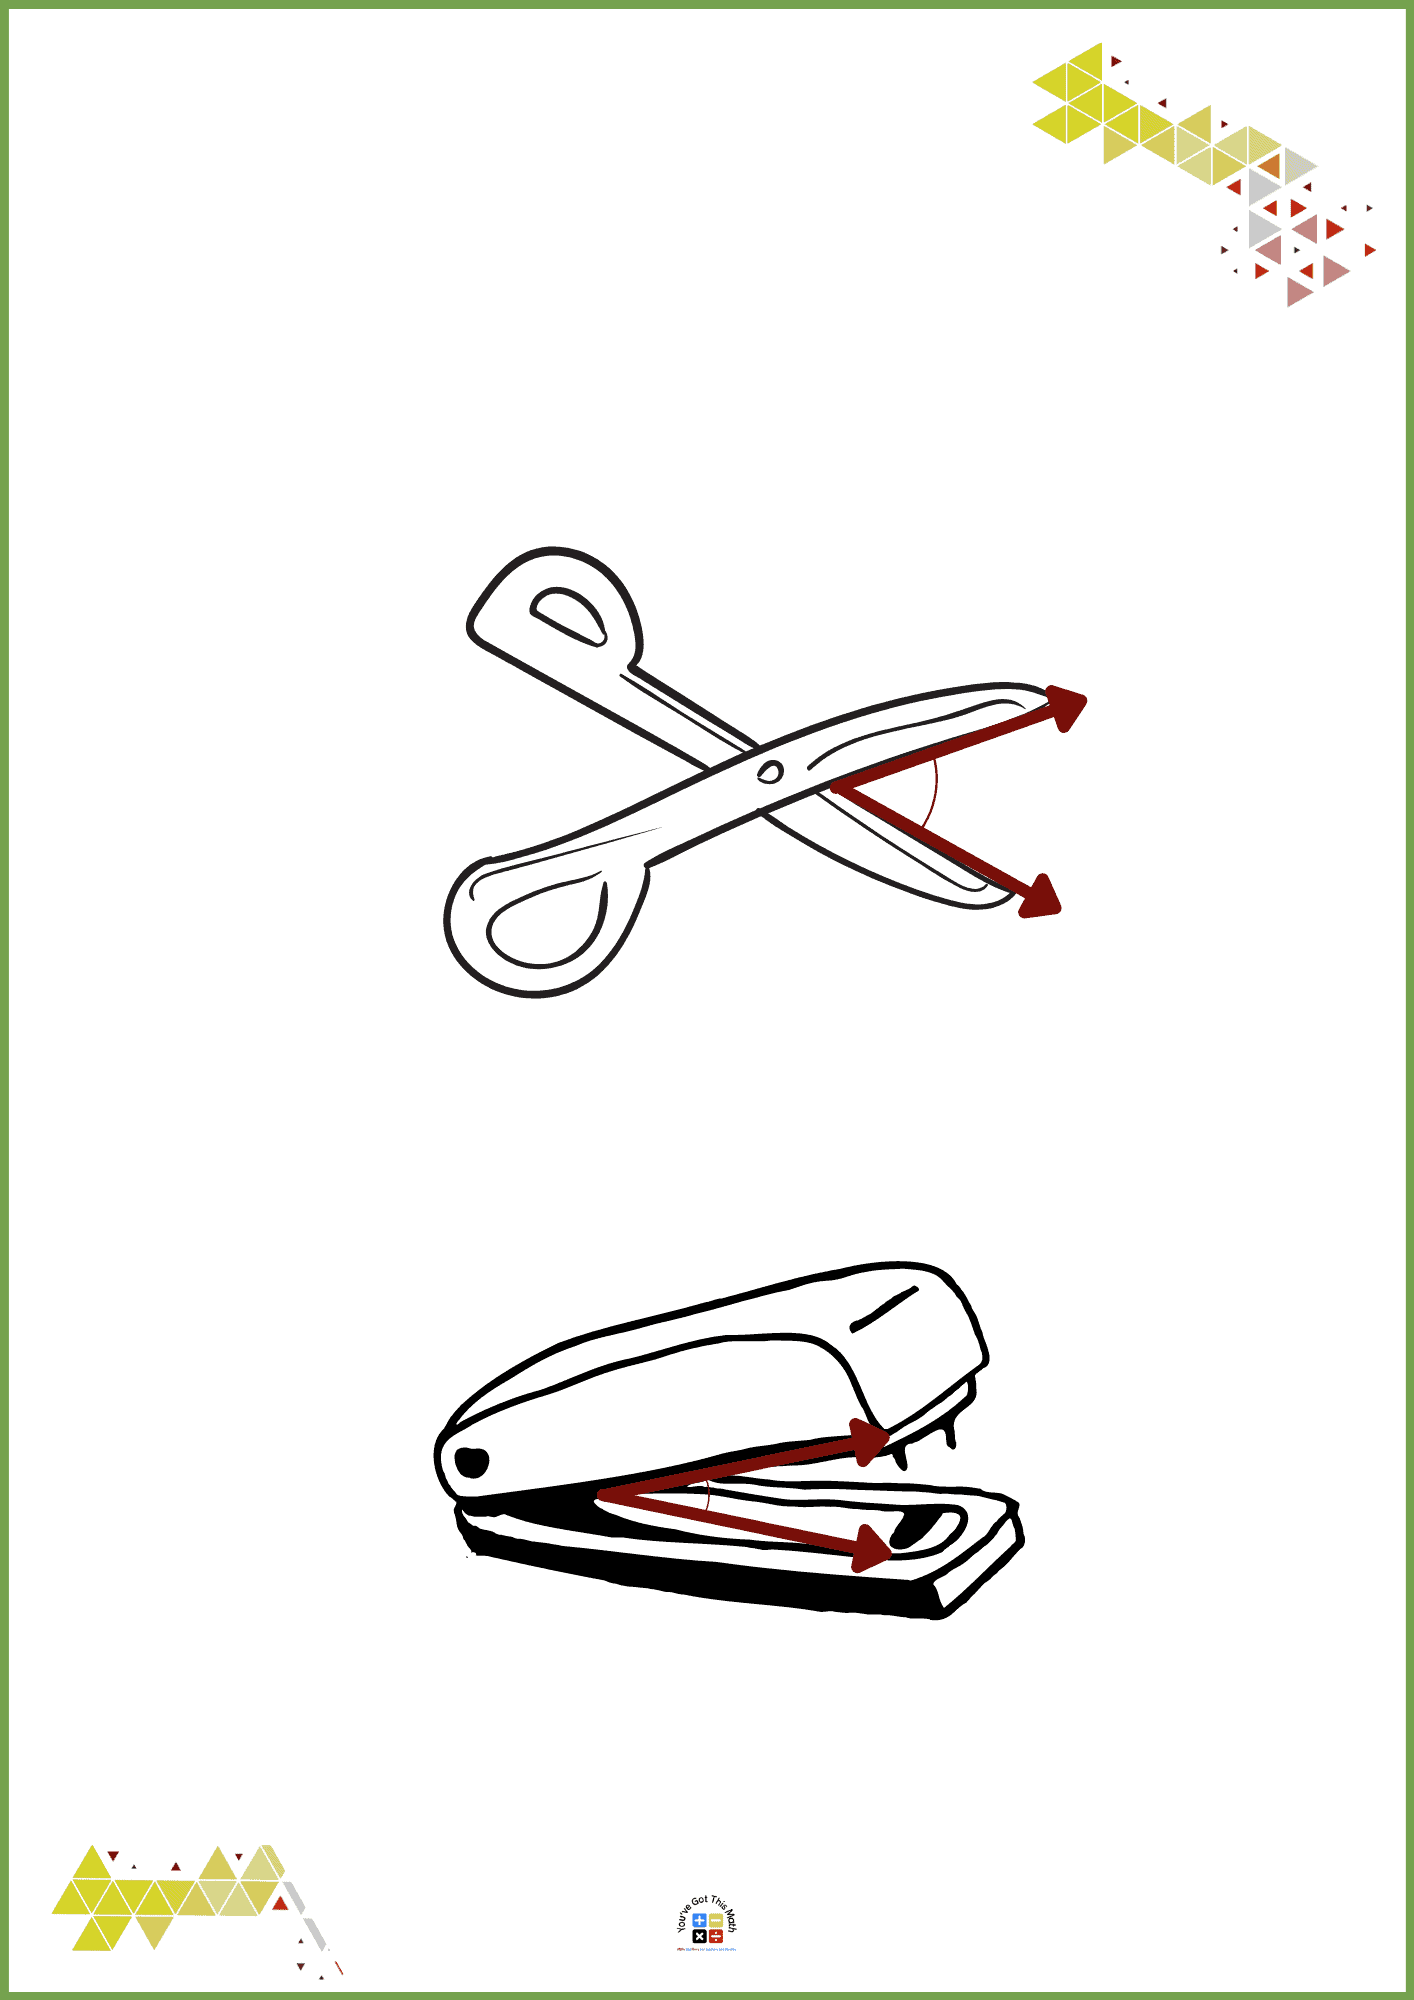 Scissors and Staplers Opened in Acute Angle Shape